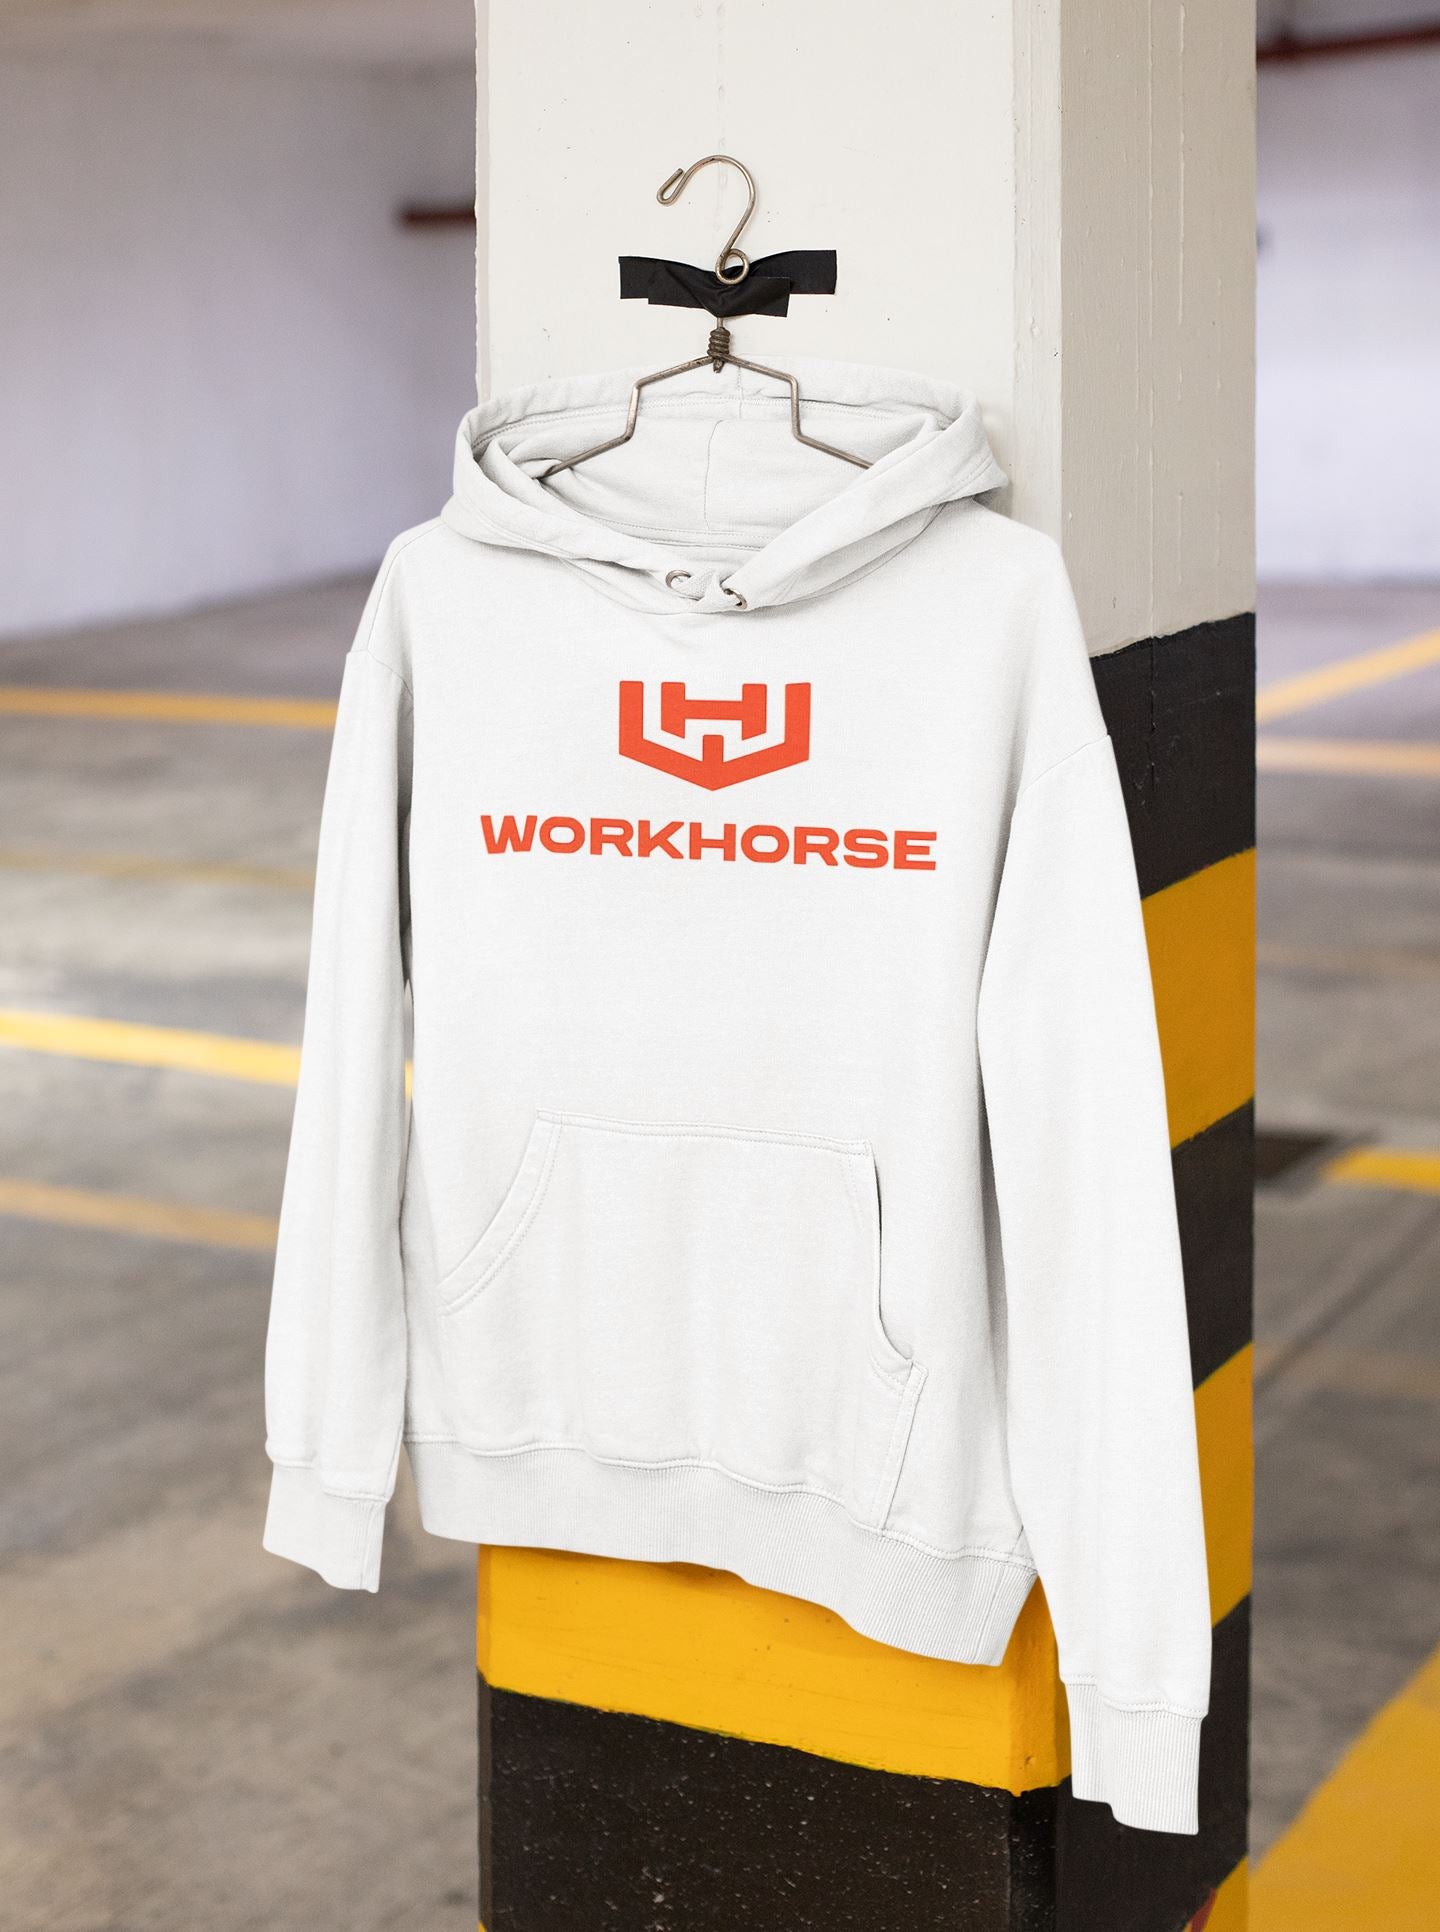 Workhorse Supreme White Hoodies for Men and Women freeshipping - Catch My Drift India